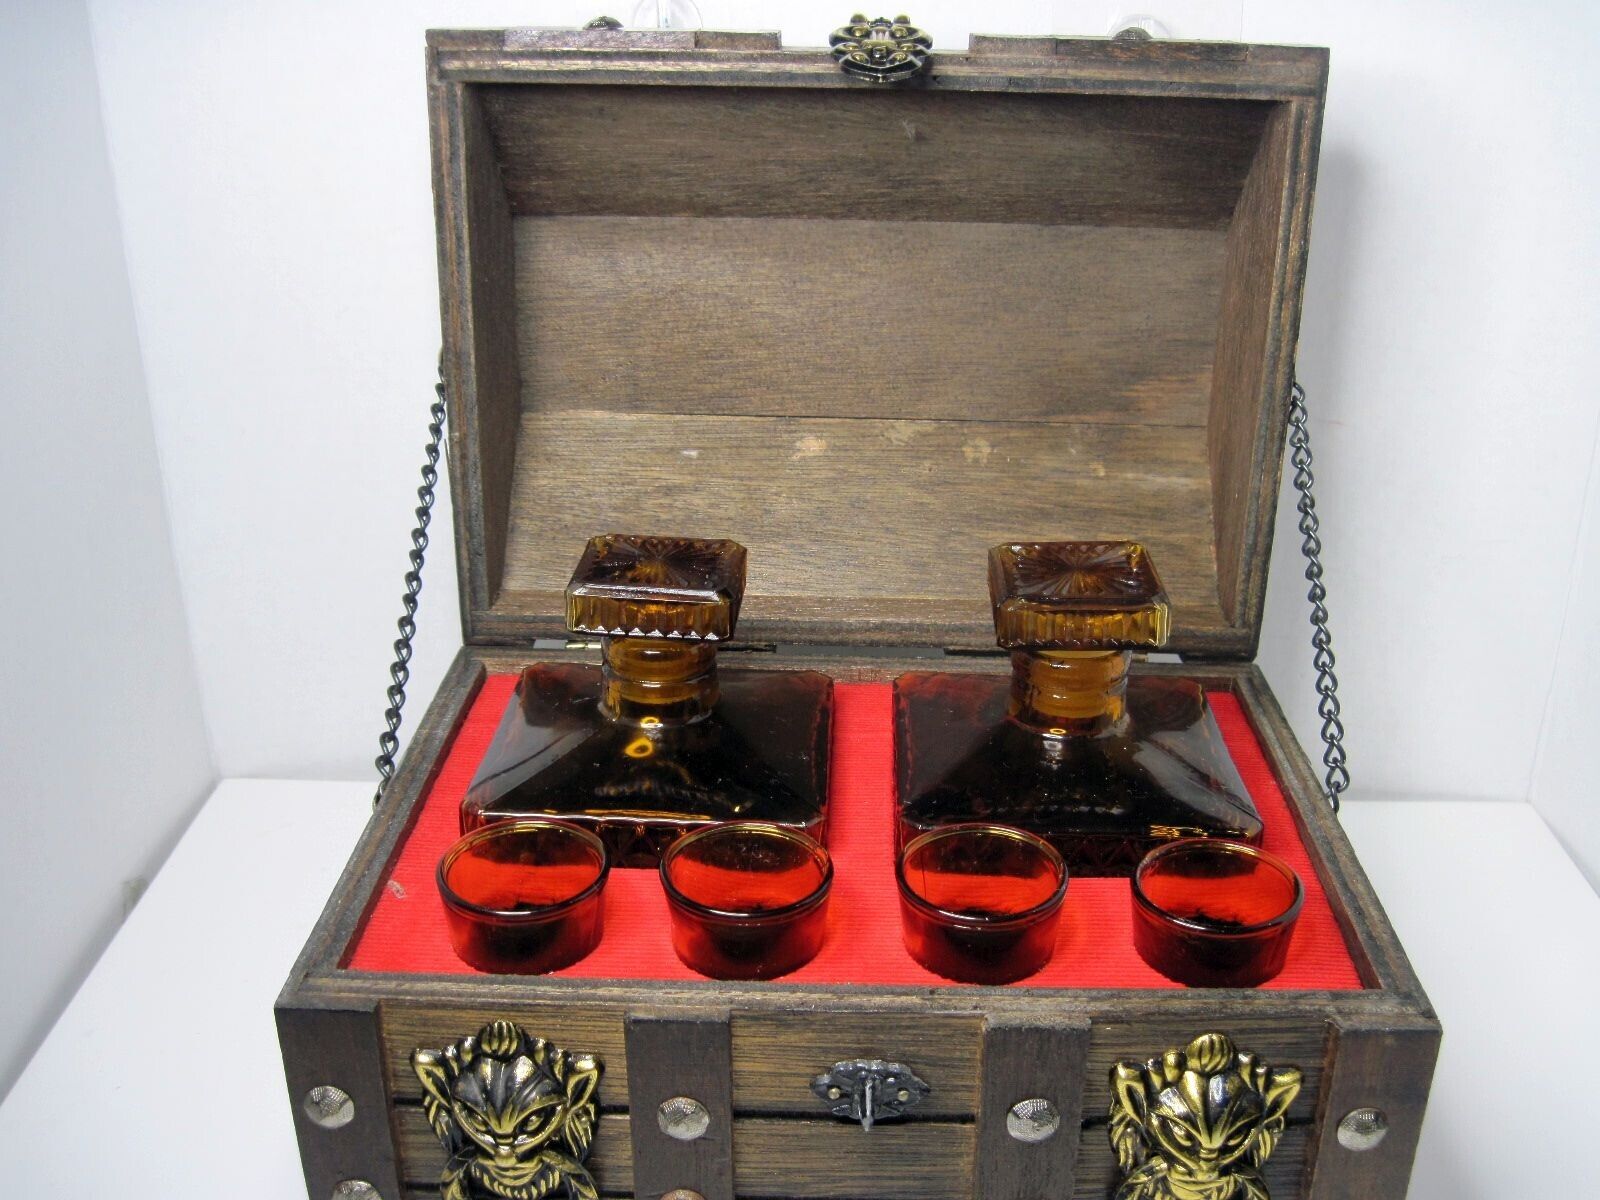 Beautiful Rare Vintage Decanters & Shot Glasses in Medieval Style Treasure Chest